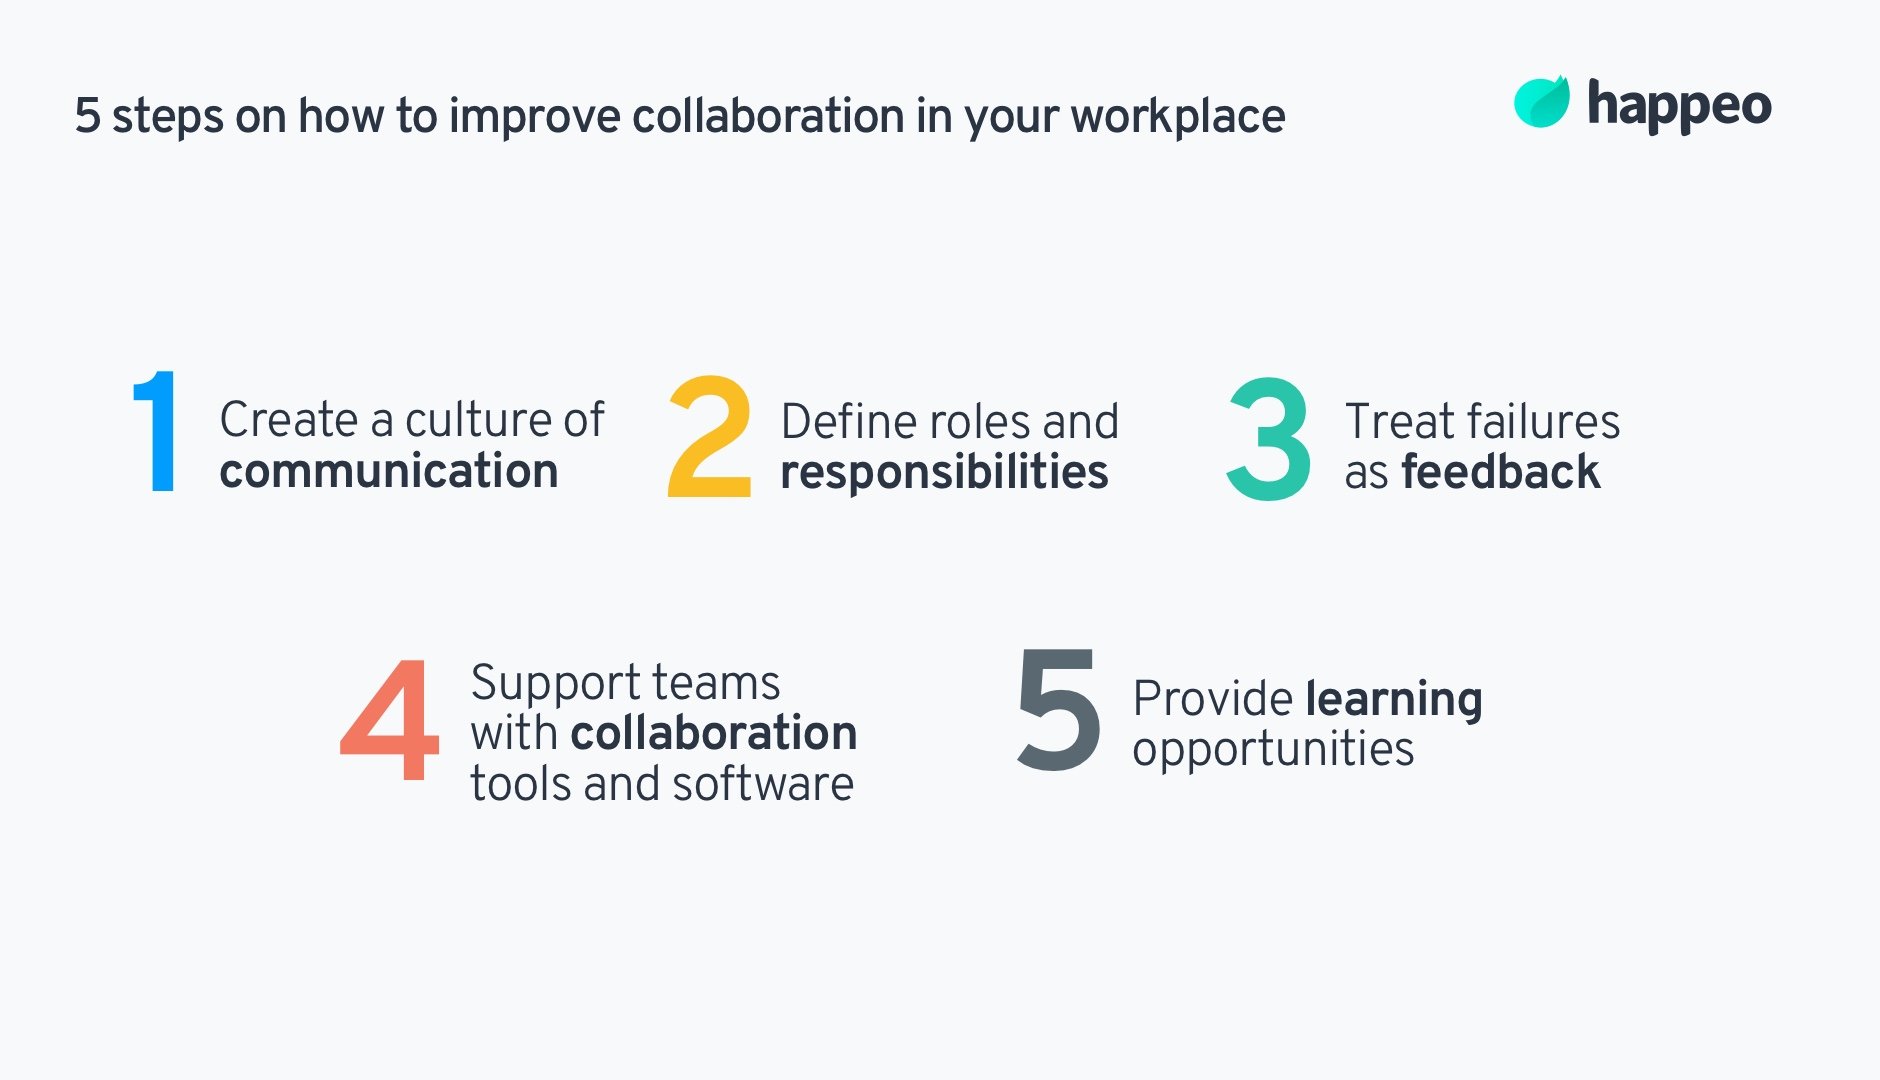 steps to improve collaboration at work